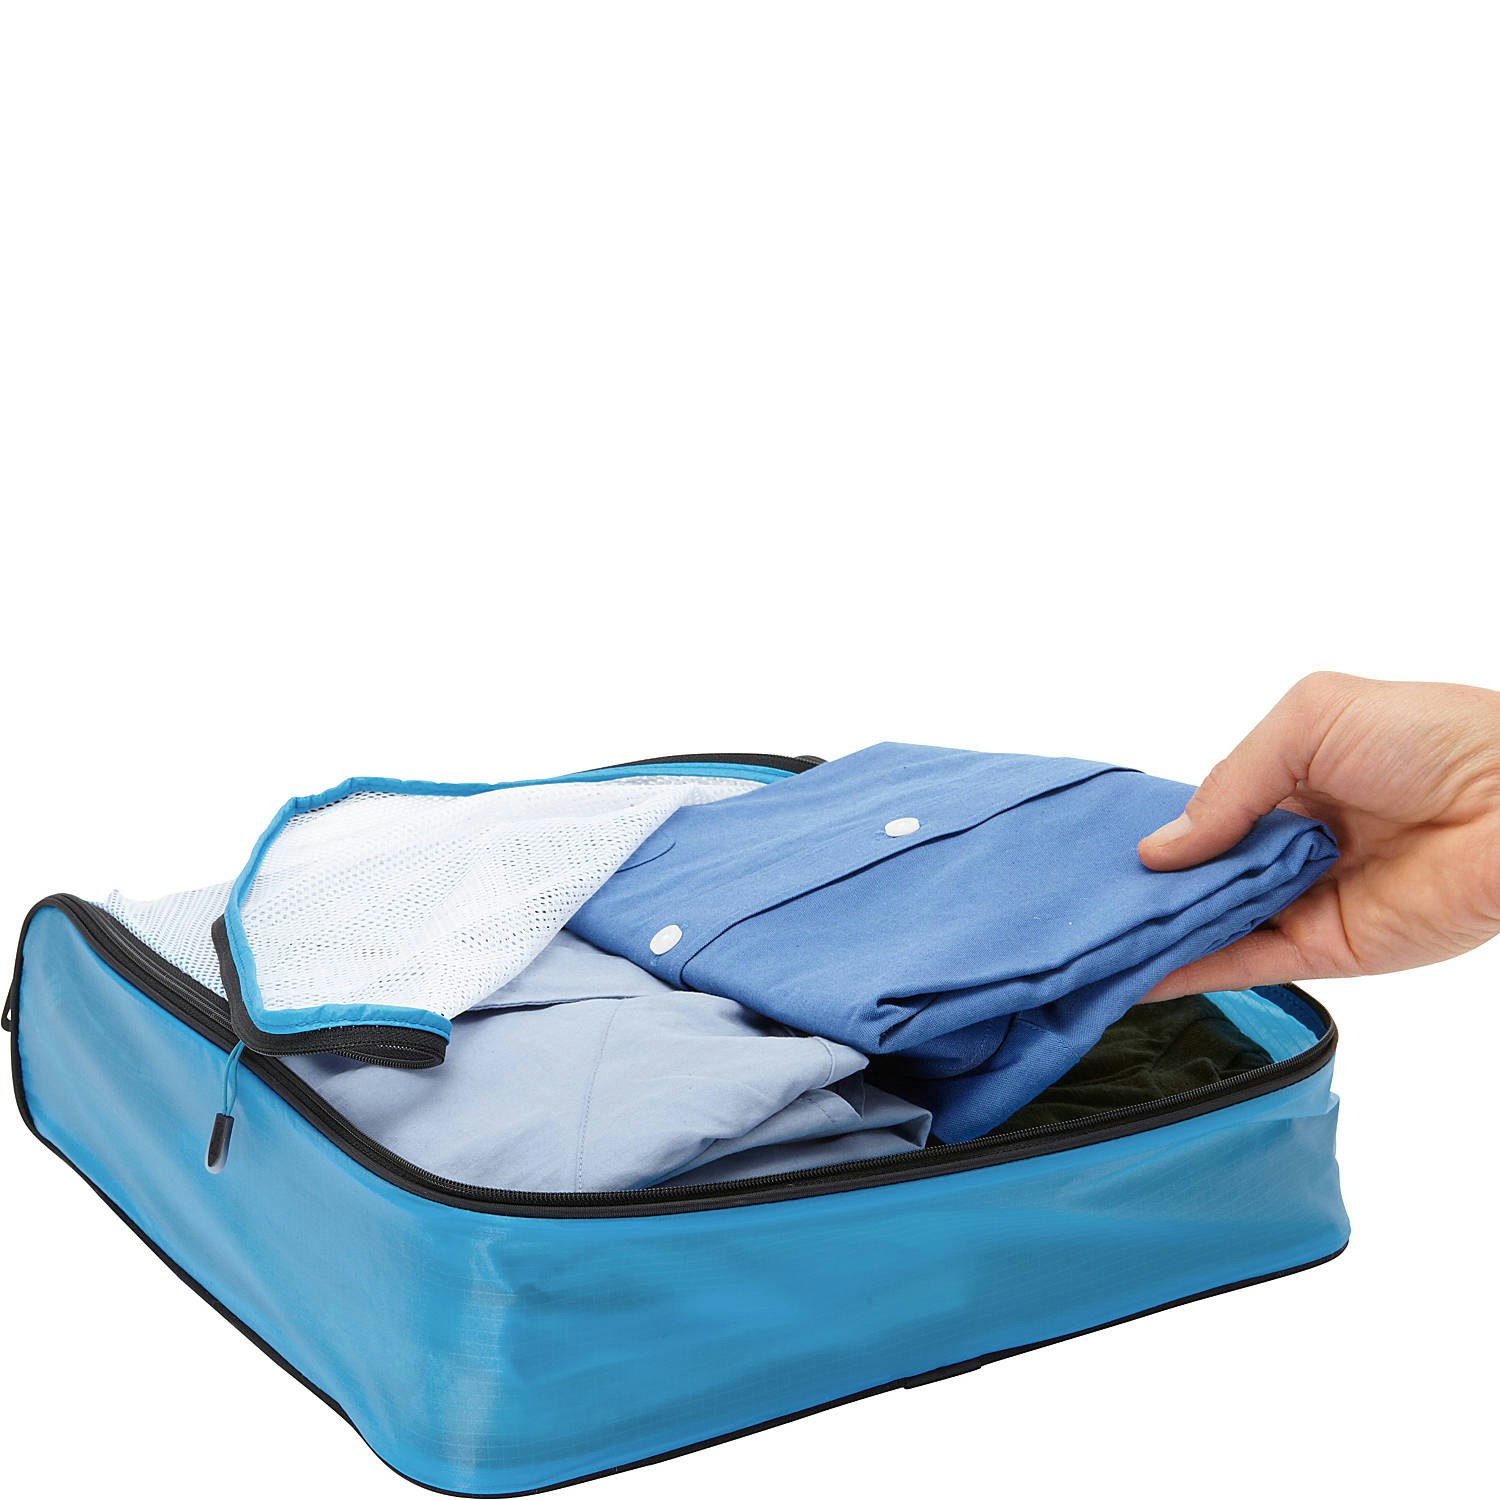 A blue travel packing cube filled with folded clothing sits against a white background with its white mesh cover partially unzipped. A white male hand reaches into the bag to lift a button-down shirt.